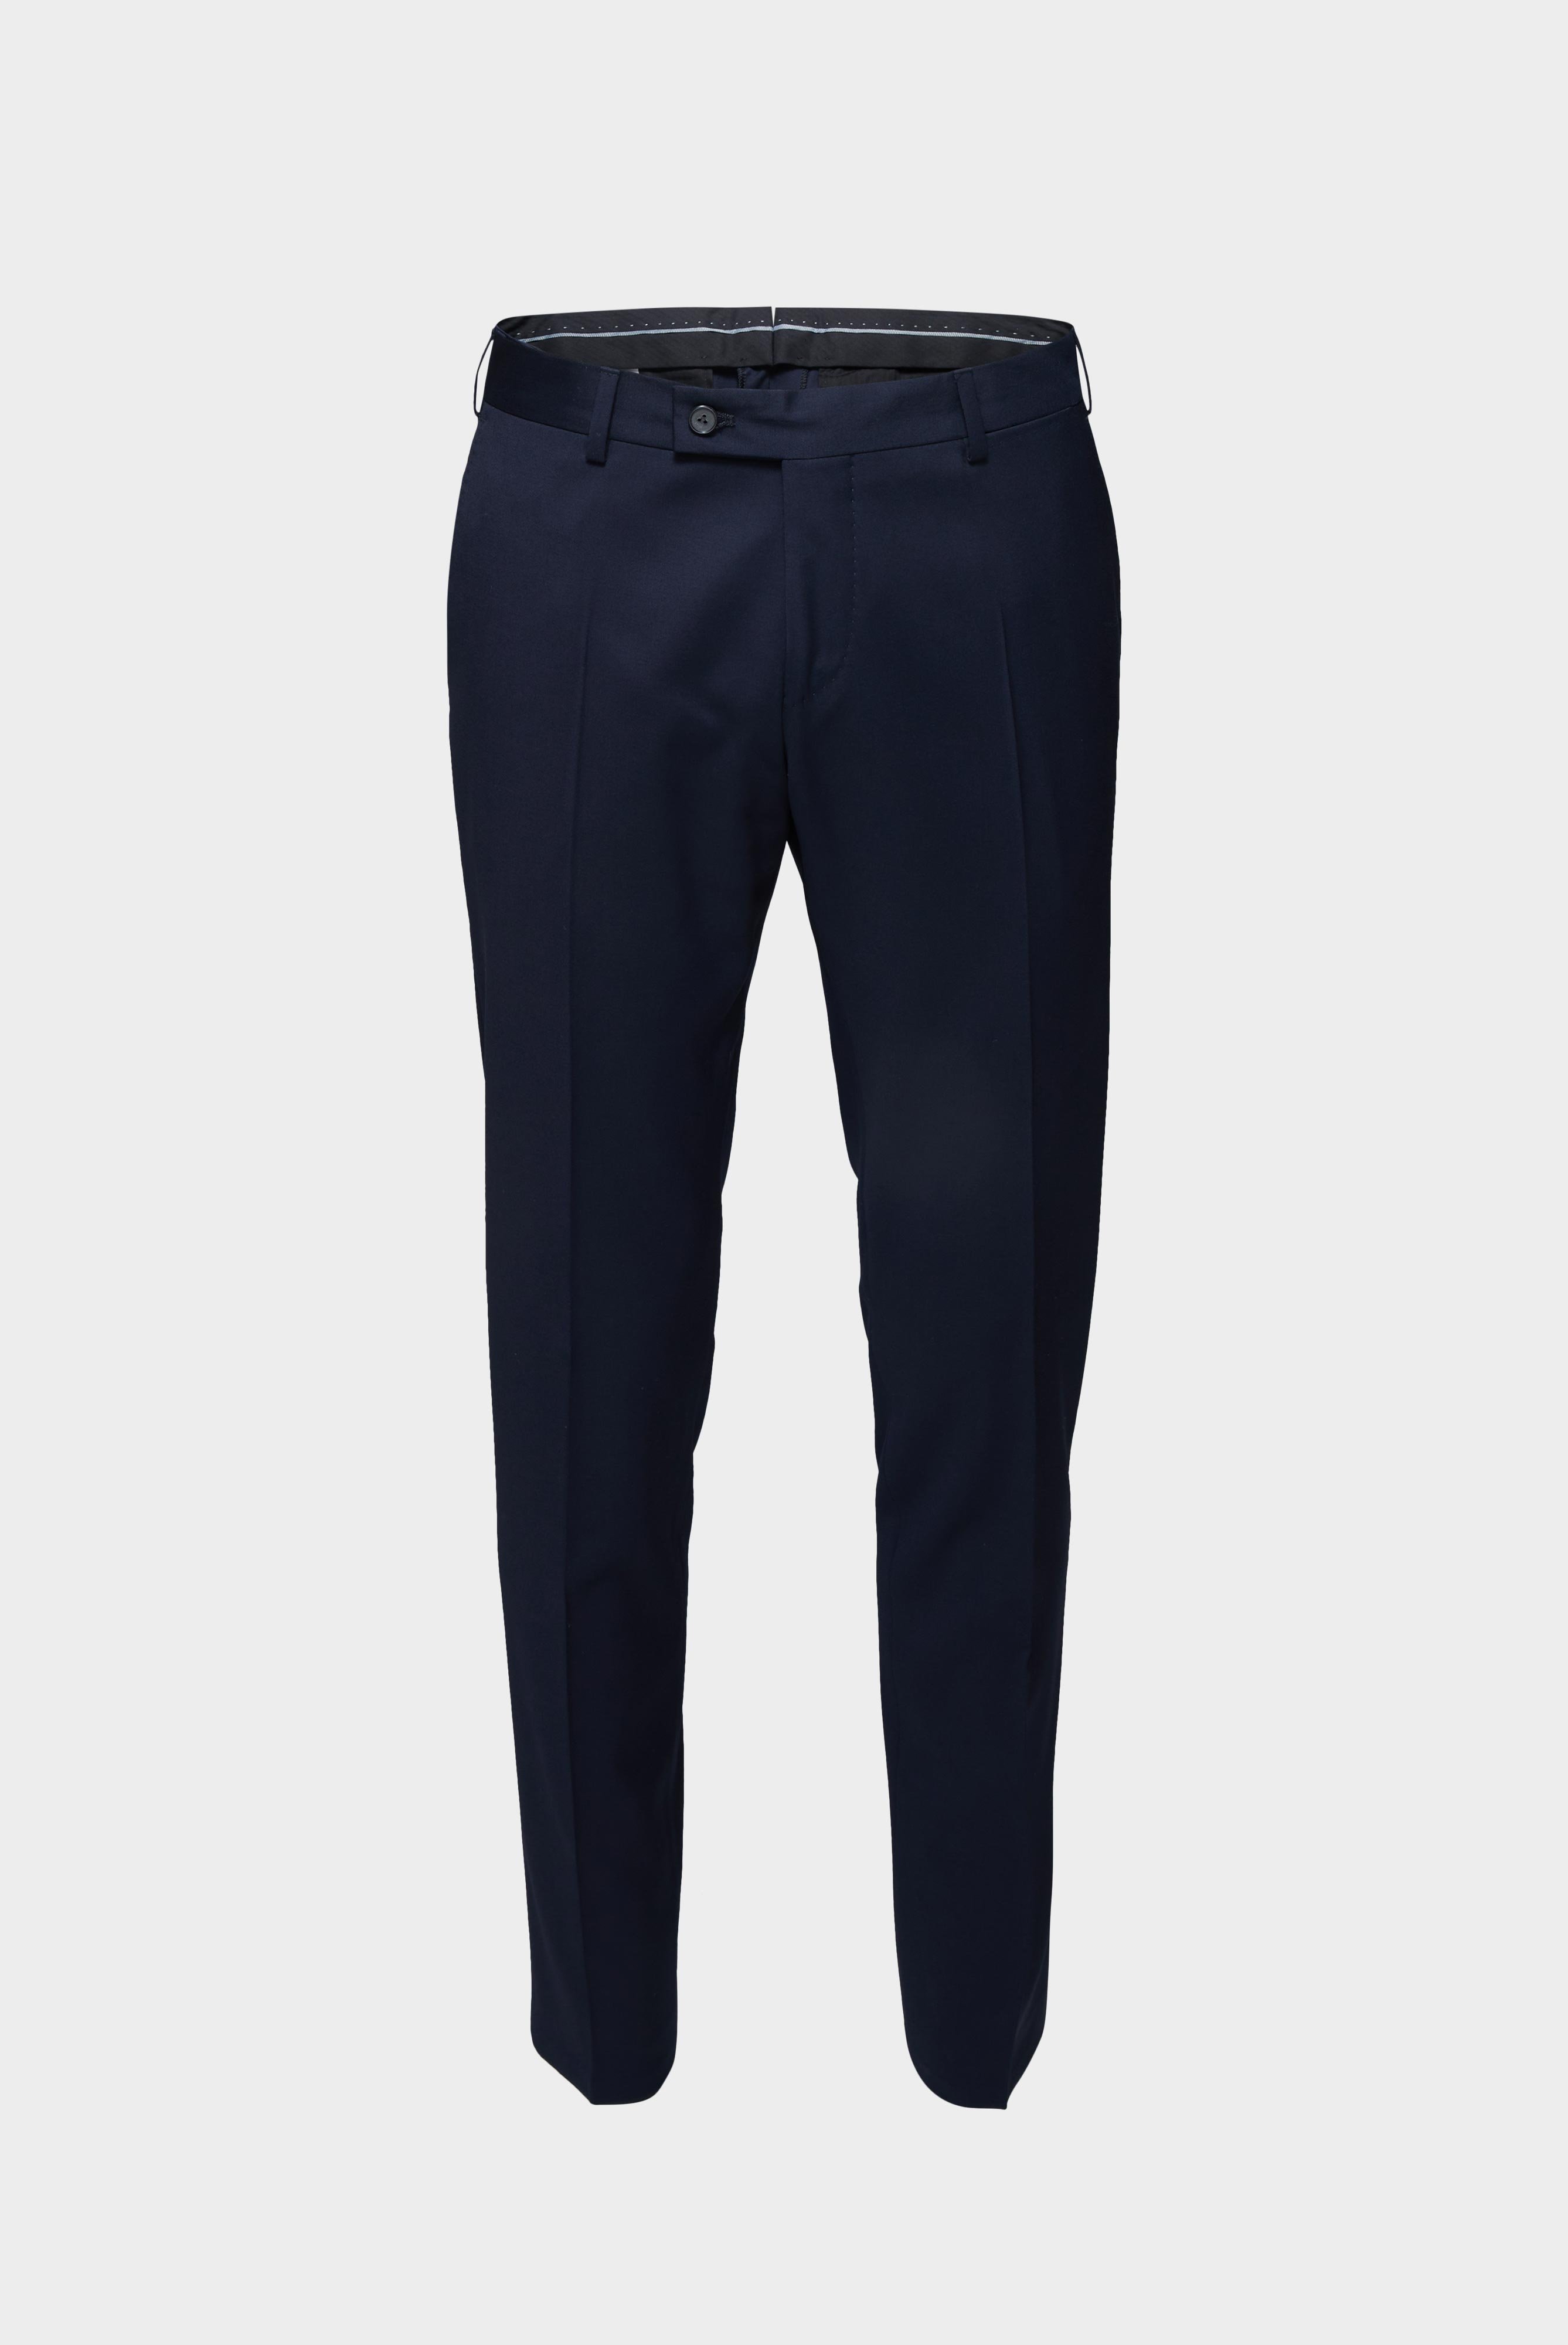 Jeans & Trousers+Wool Trousers Slim Fit+20.7880.16.H01010.780.50